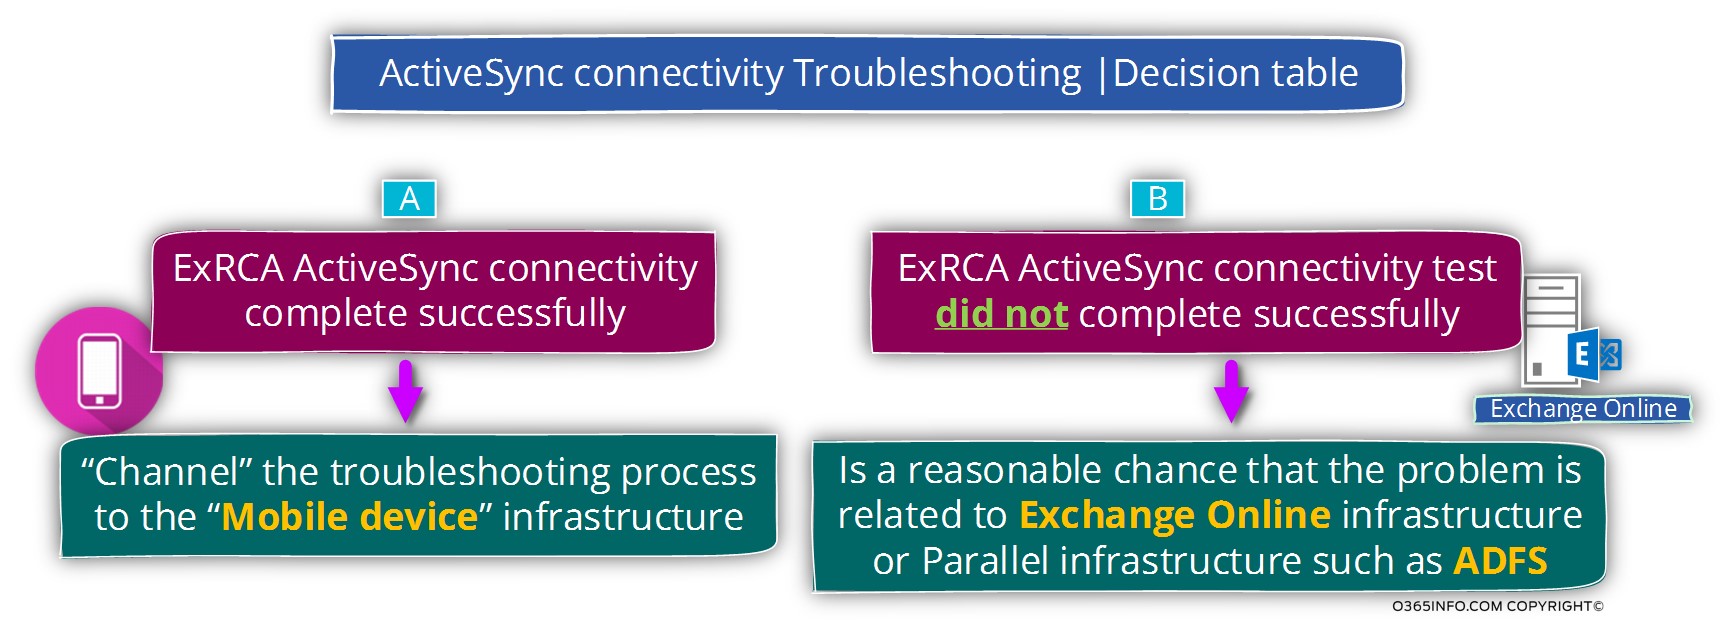 ActiveSync connectivity Troubleshooting - Decision table